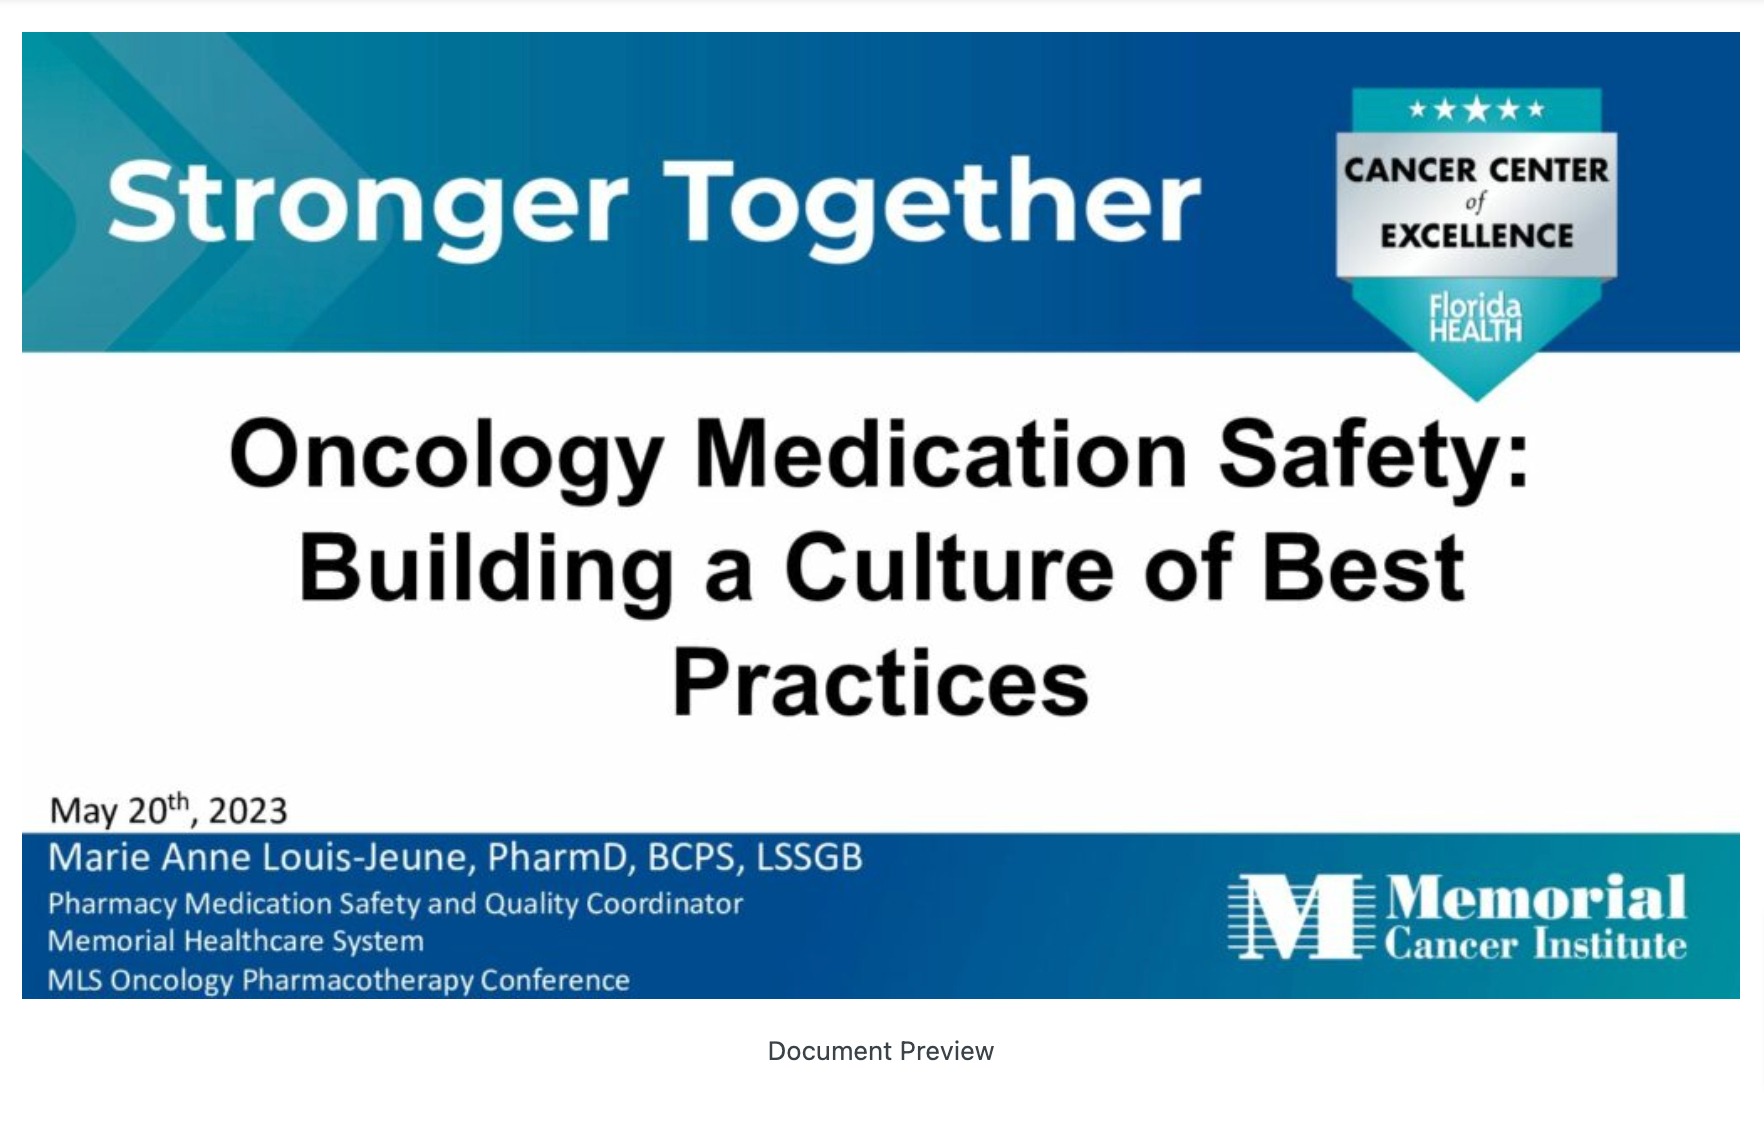 Oncology Medication Safety; Building a Culture of Best Practices